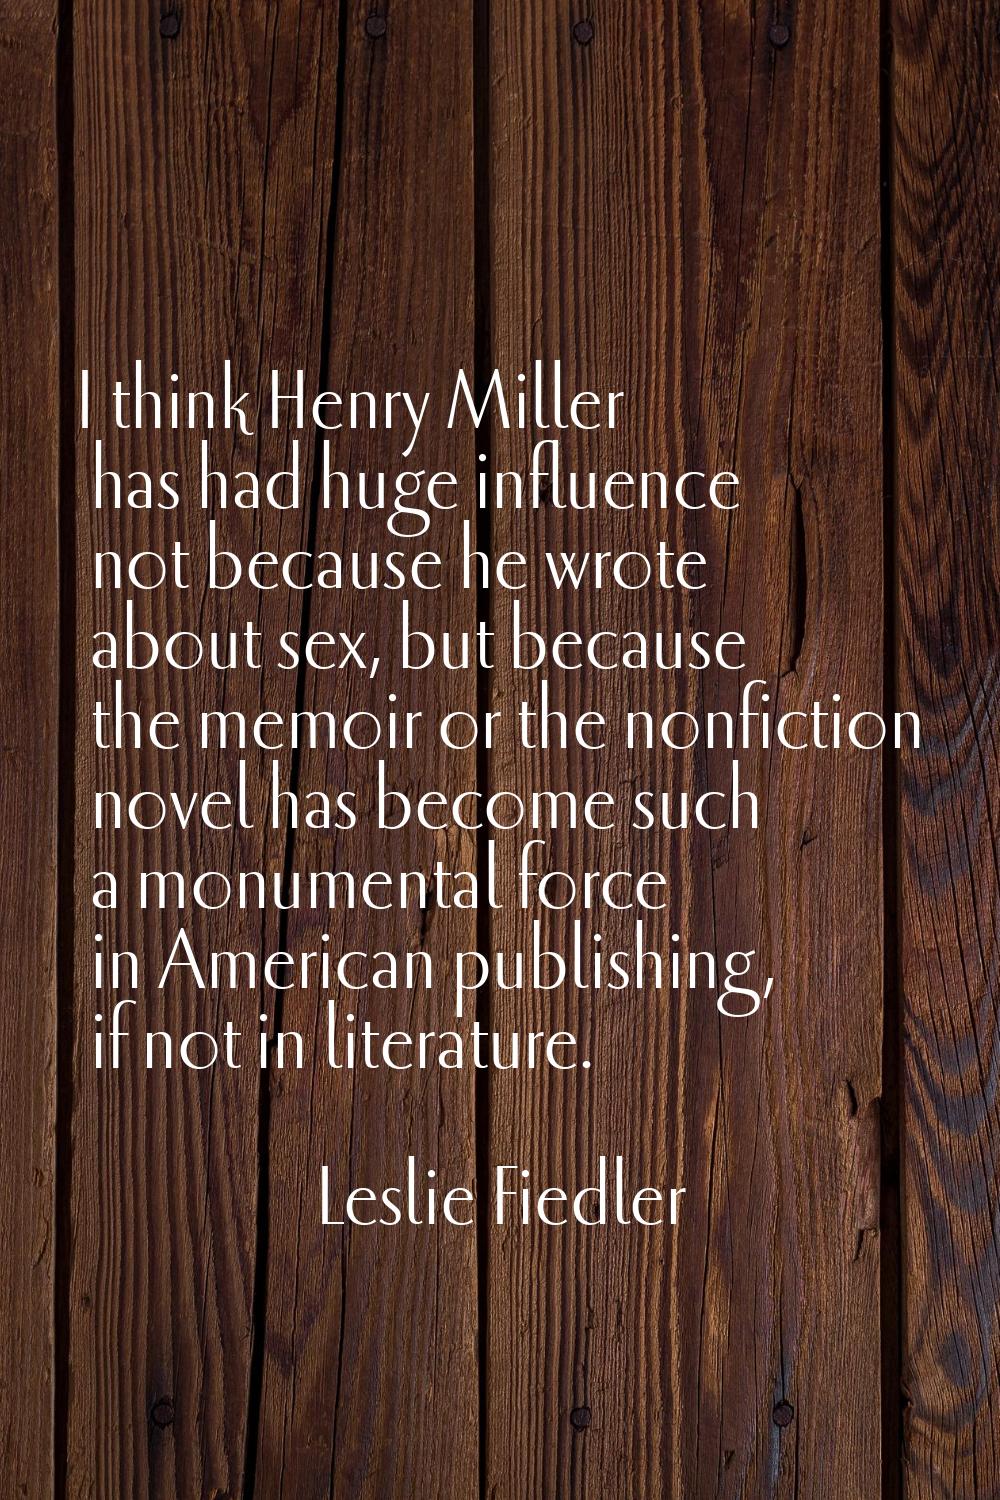 I think Henry Miller has had huge influence not because he wrote about sex, but because the memoir 